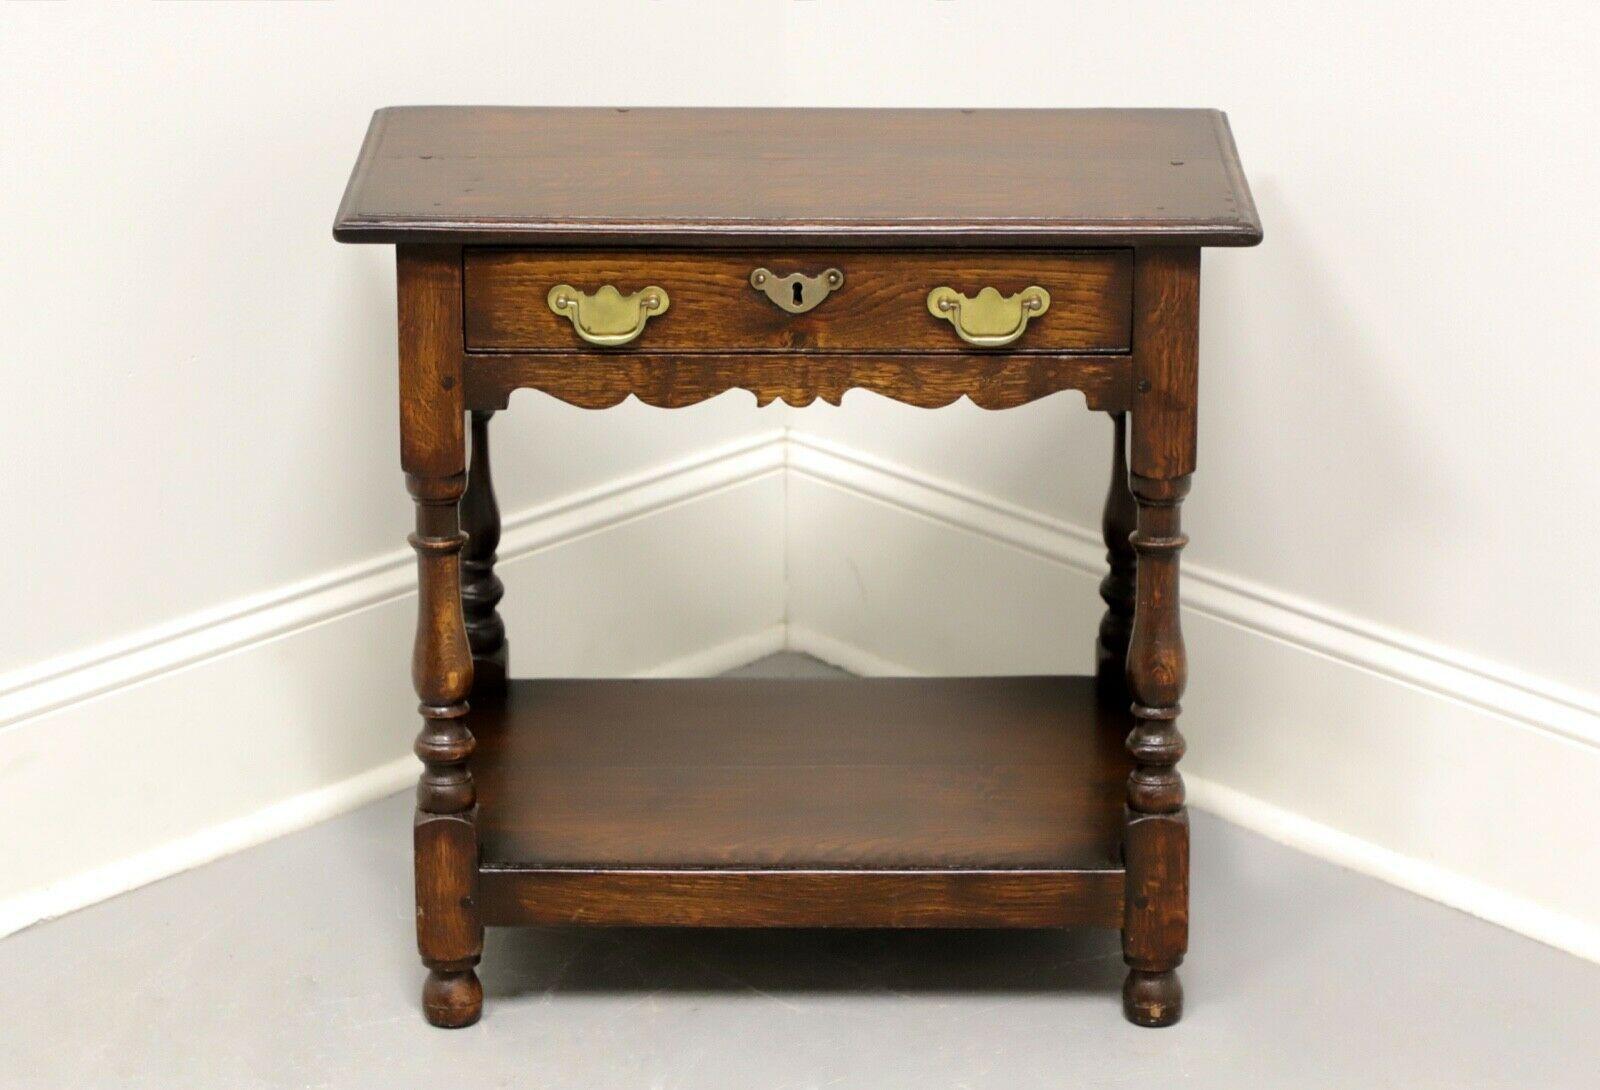 An antique Colonial style accent table, unbranded. Tiger oak with brass hardware. Features one dovetail drawer with lock (no key), lower shelf and turned legs. Possibly made in England or the USA, in the 19th Century.

Measures: 24.25 W 14.25 D